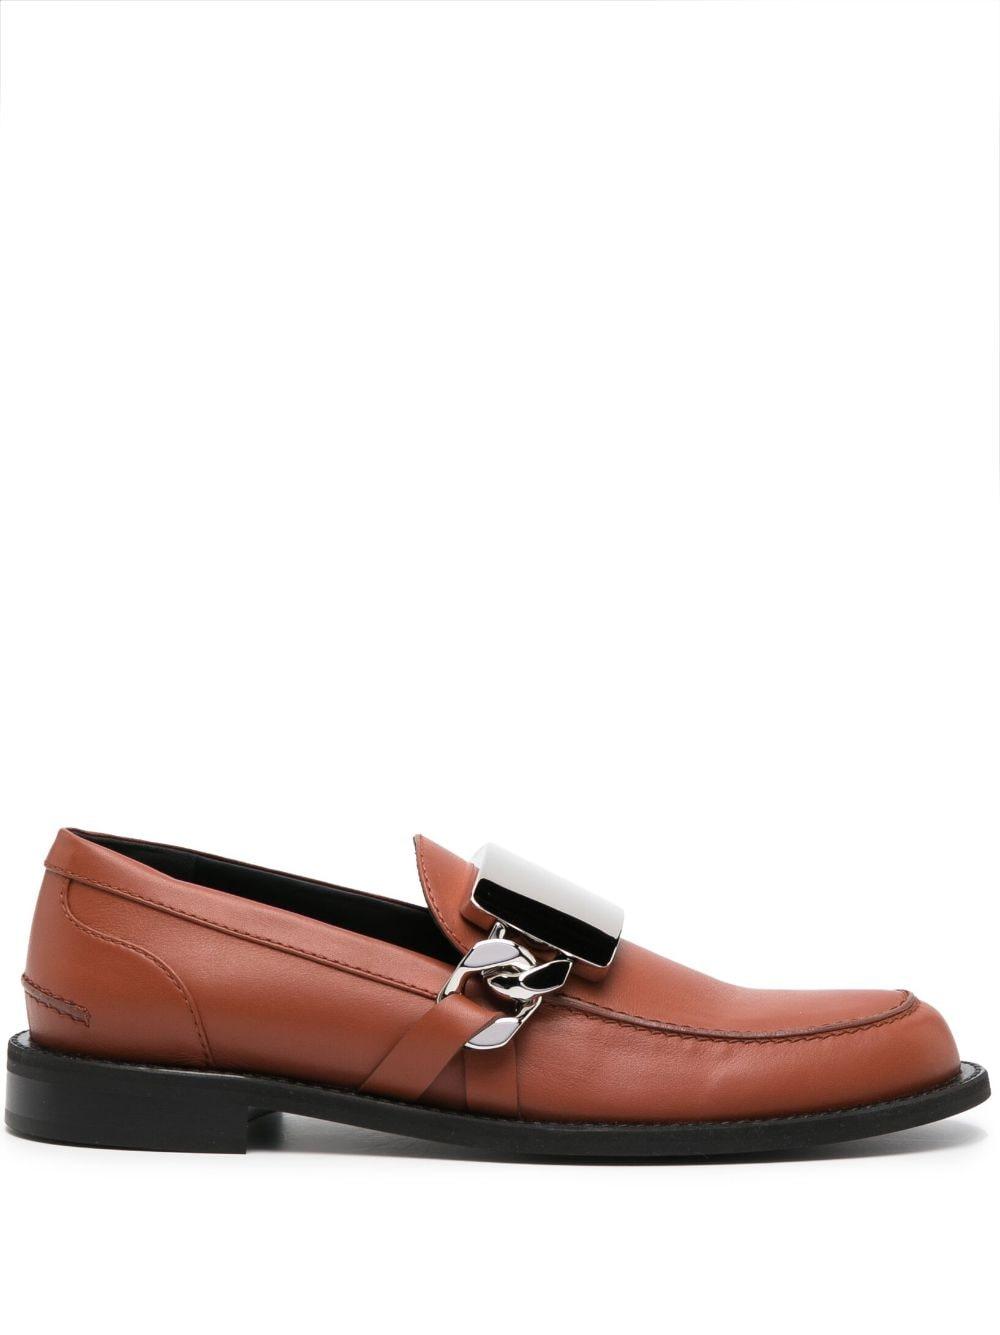 JW Anderson Gourmet Chain Leather Loafers in Black for Men | Lyst